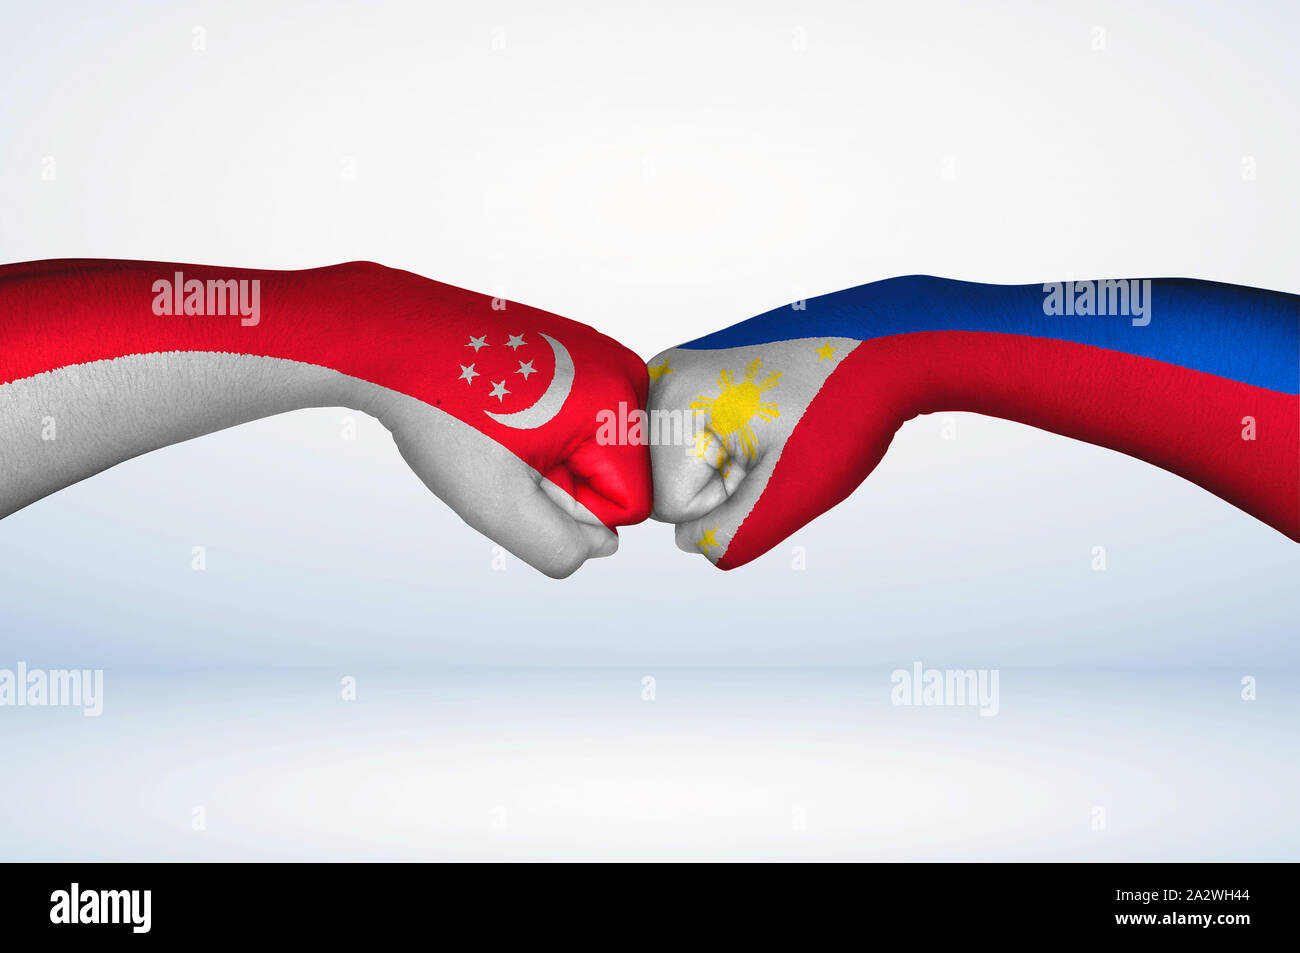 Fist bump of Filipino and Singaporean flags. Two hands with painted flags of Philippines and Singapore Flag fist bumping as a symbol of unity. Stock Photo